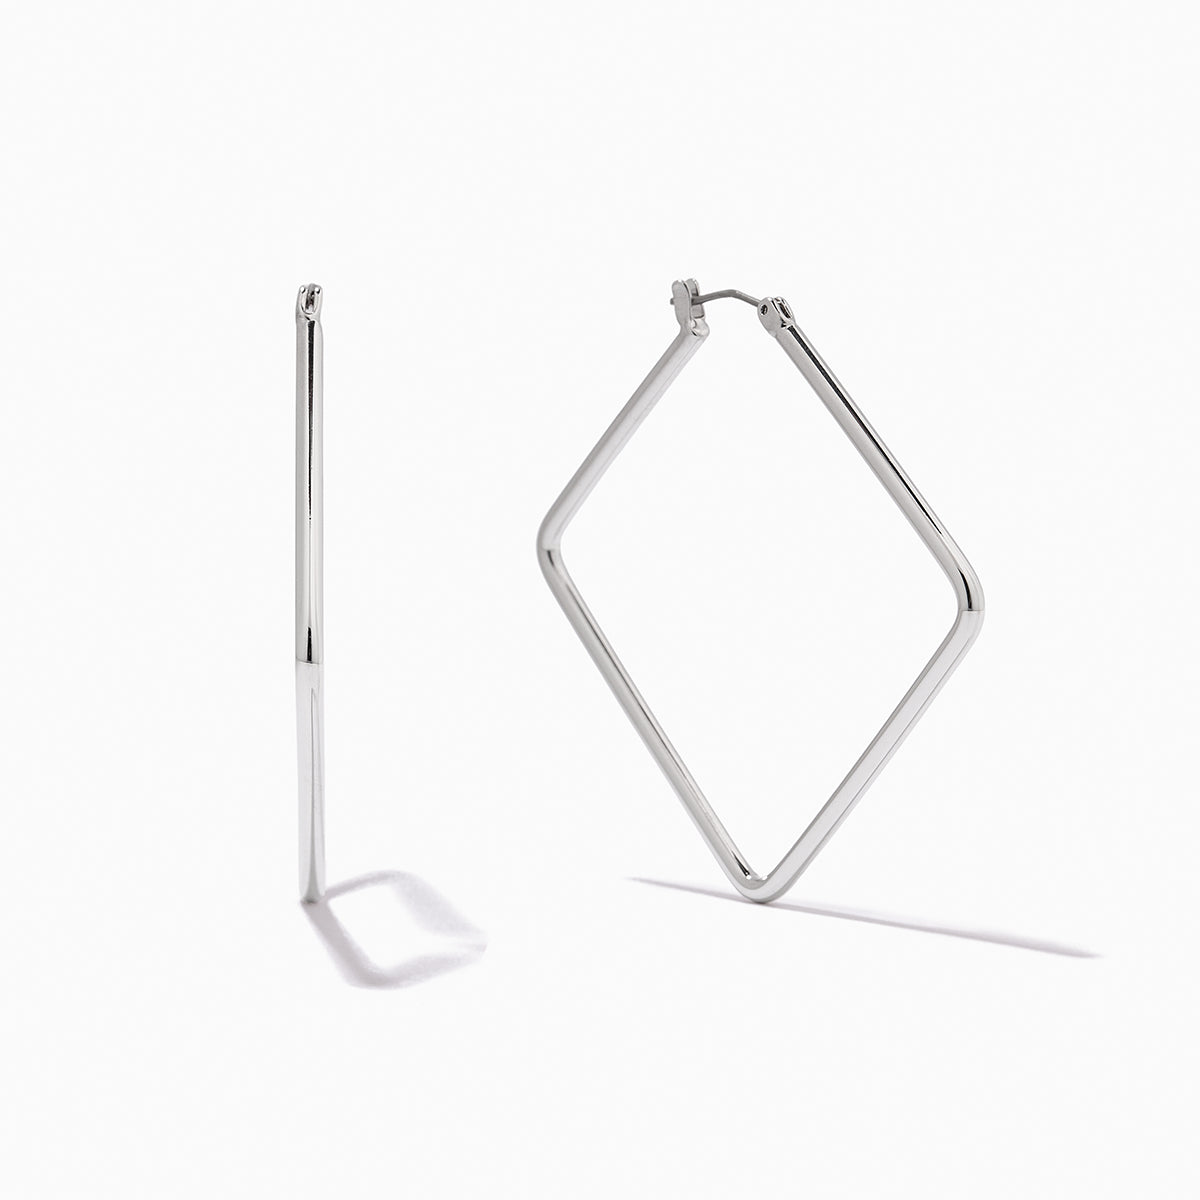 Girl Boss Earrings Medium | Sterling Silver | Product Image | Uncommon James